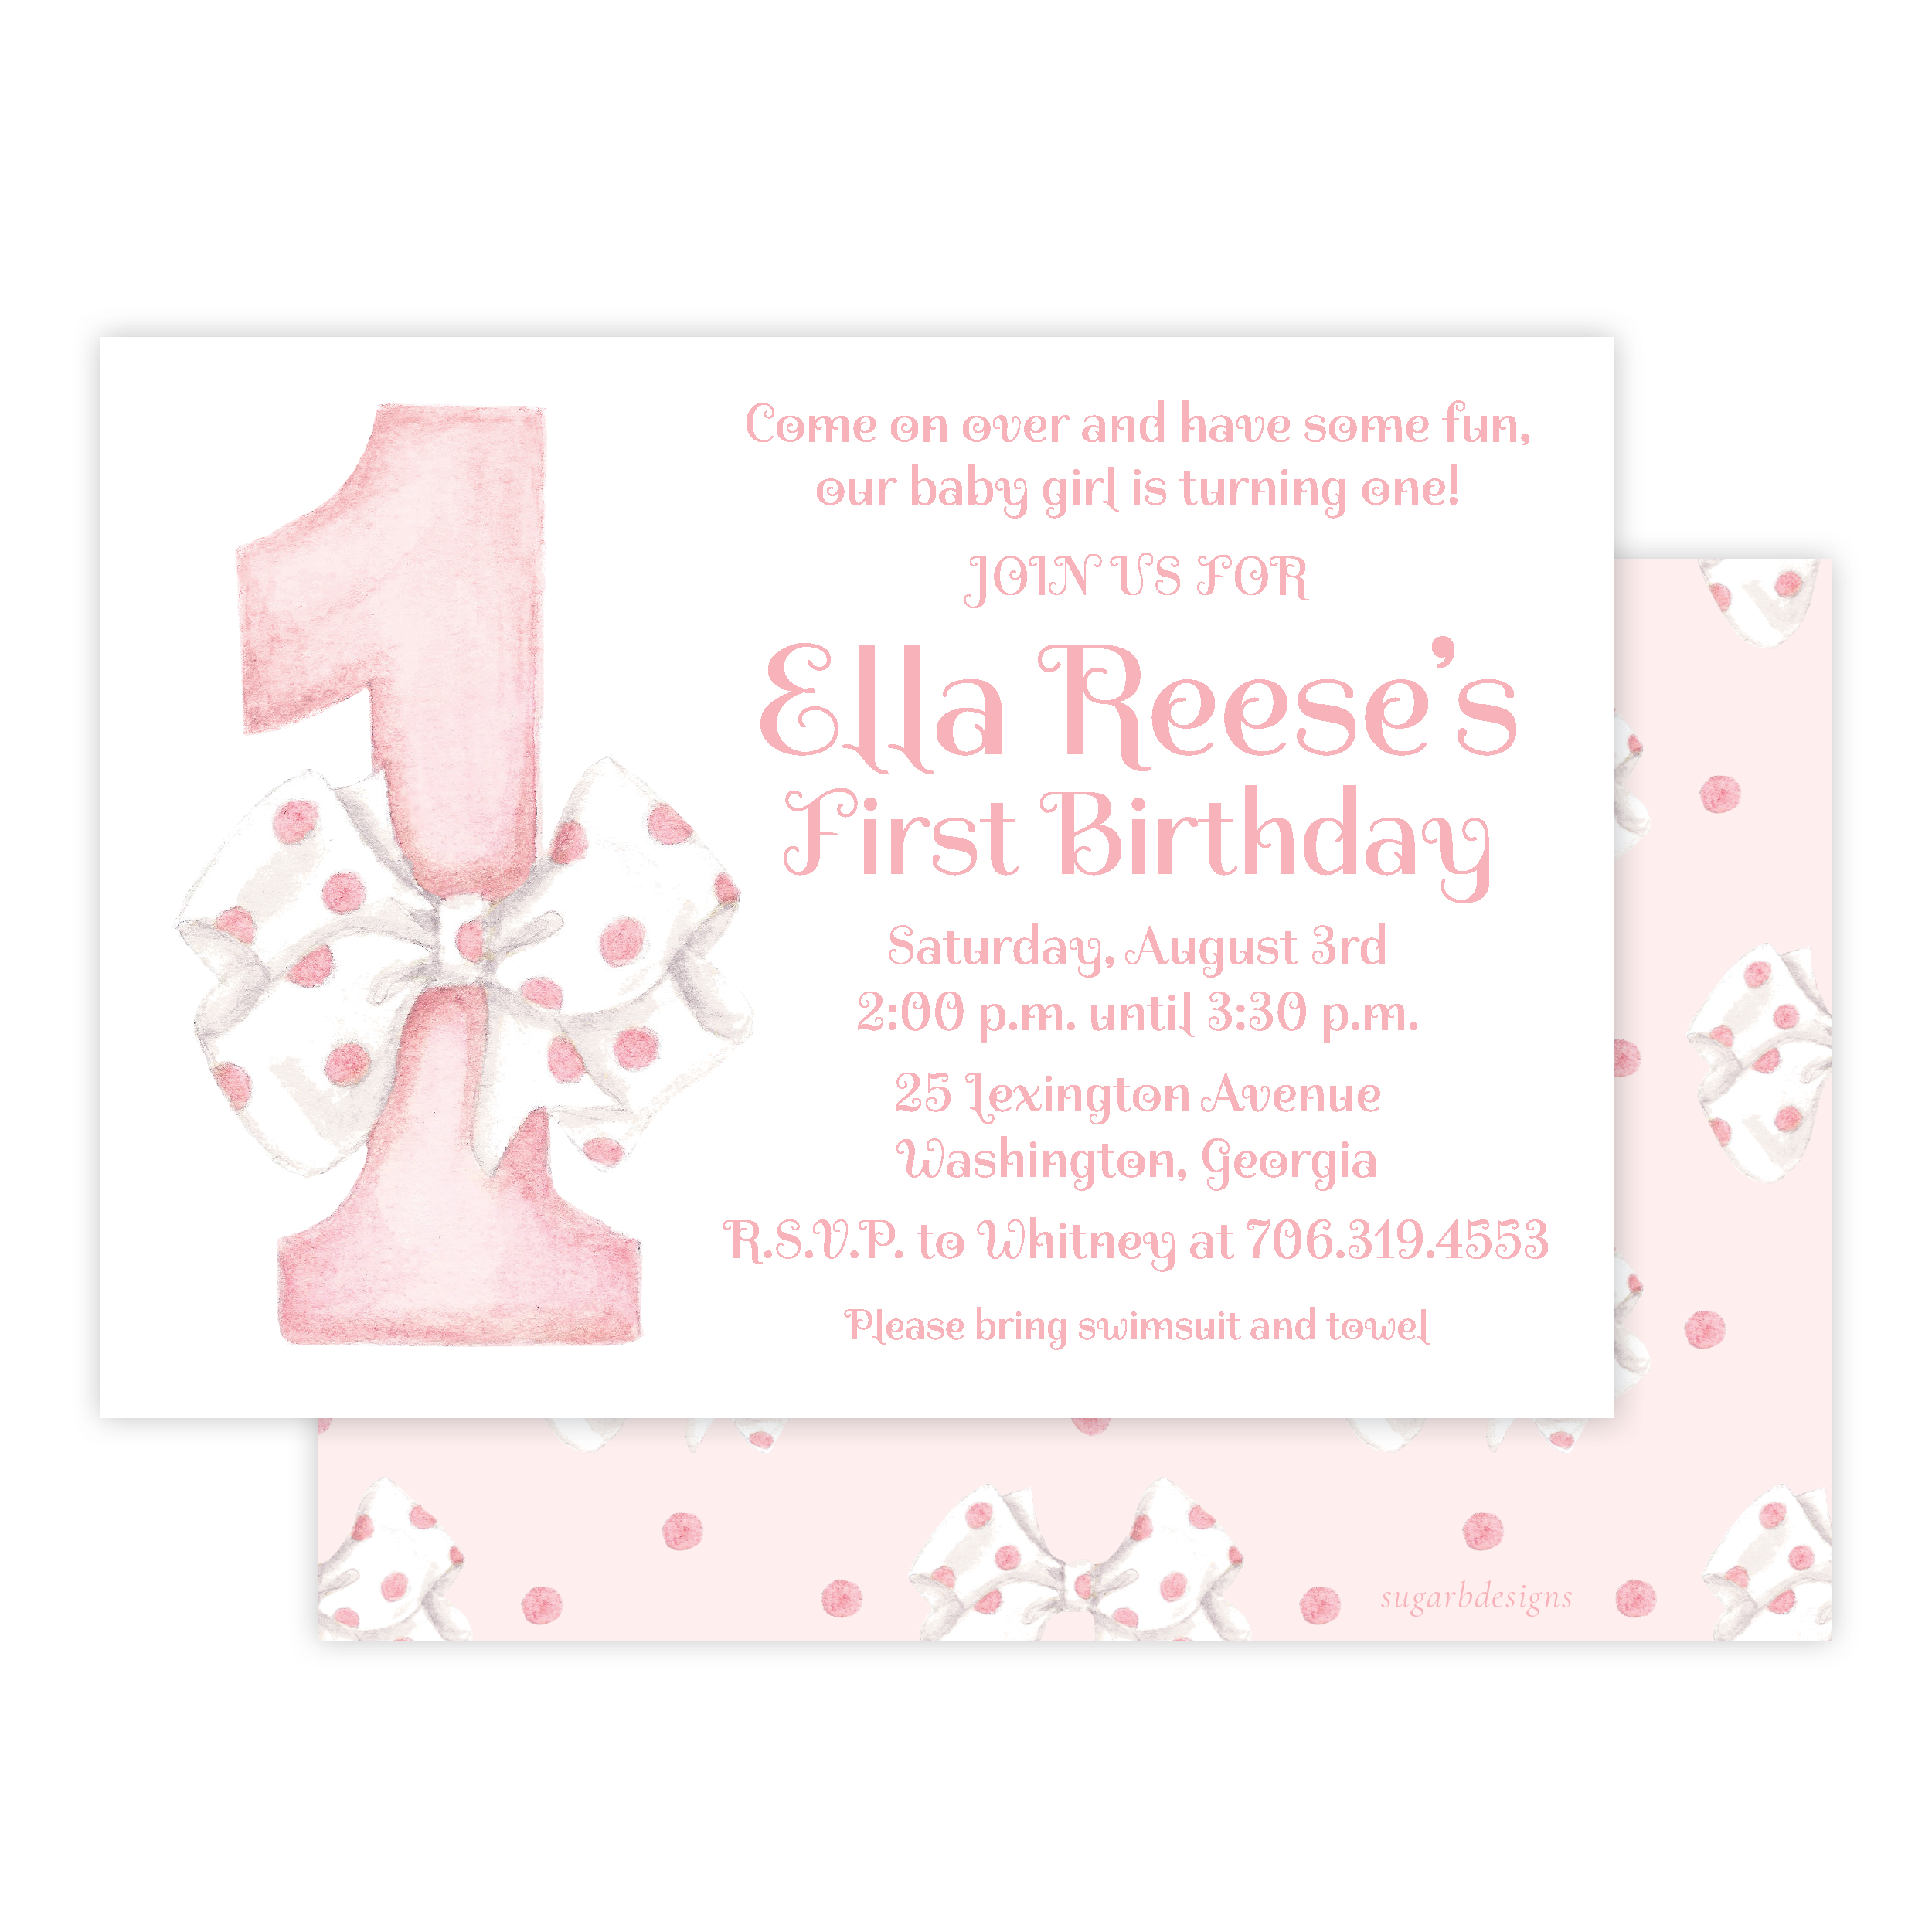 Birthday Party Invitations for Girls, Kids, 25 Invite Cards with Envelopes